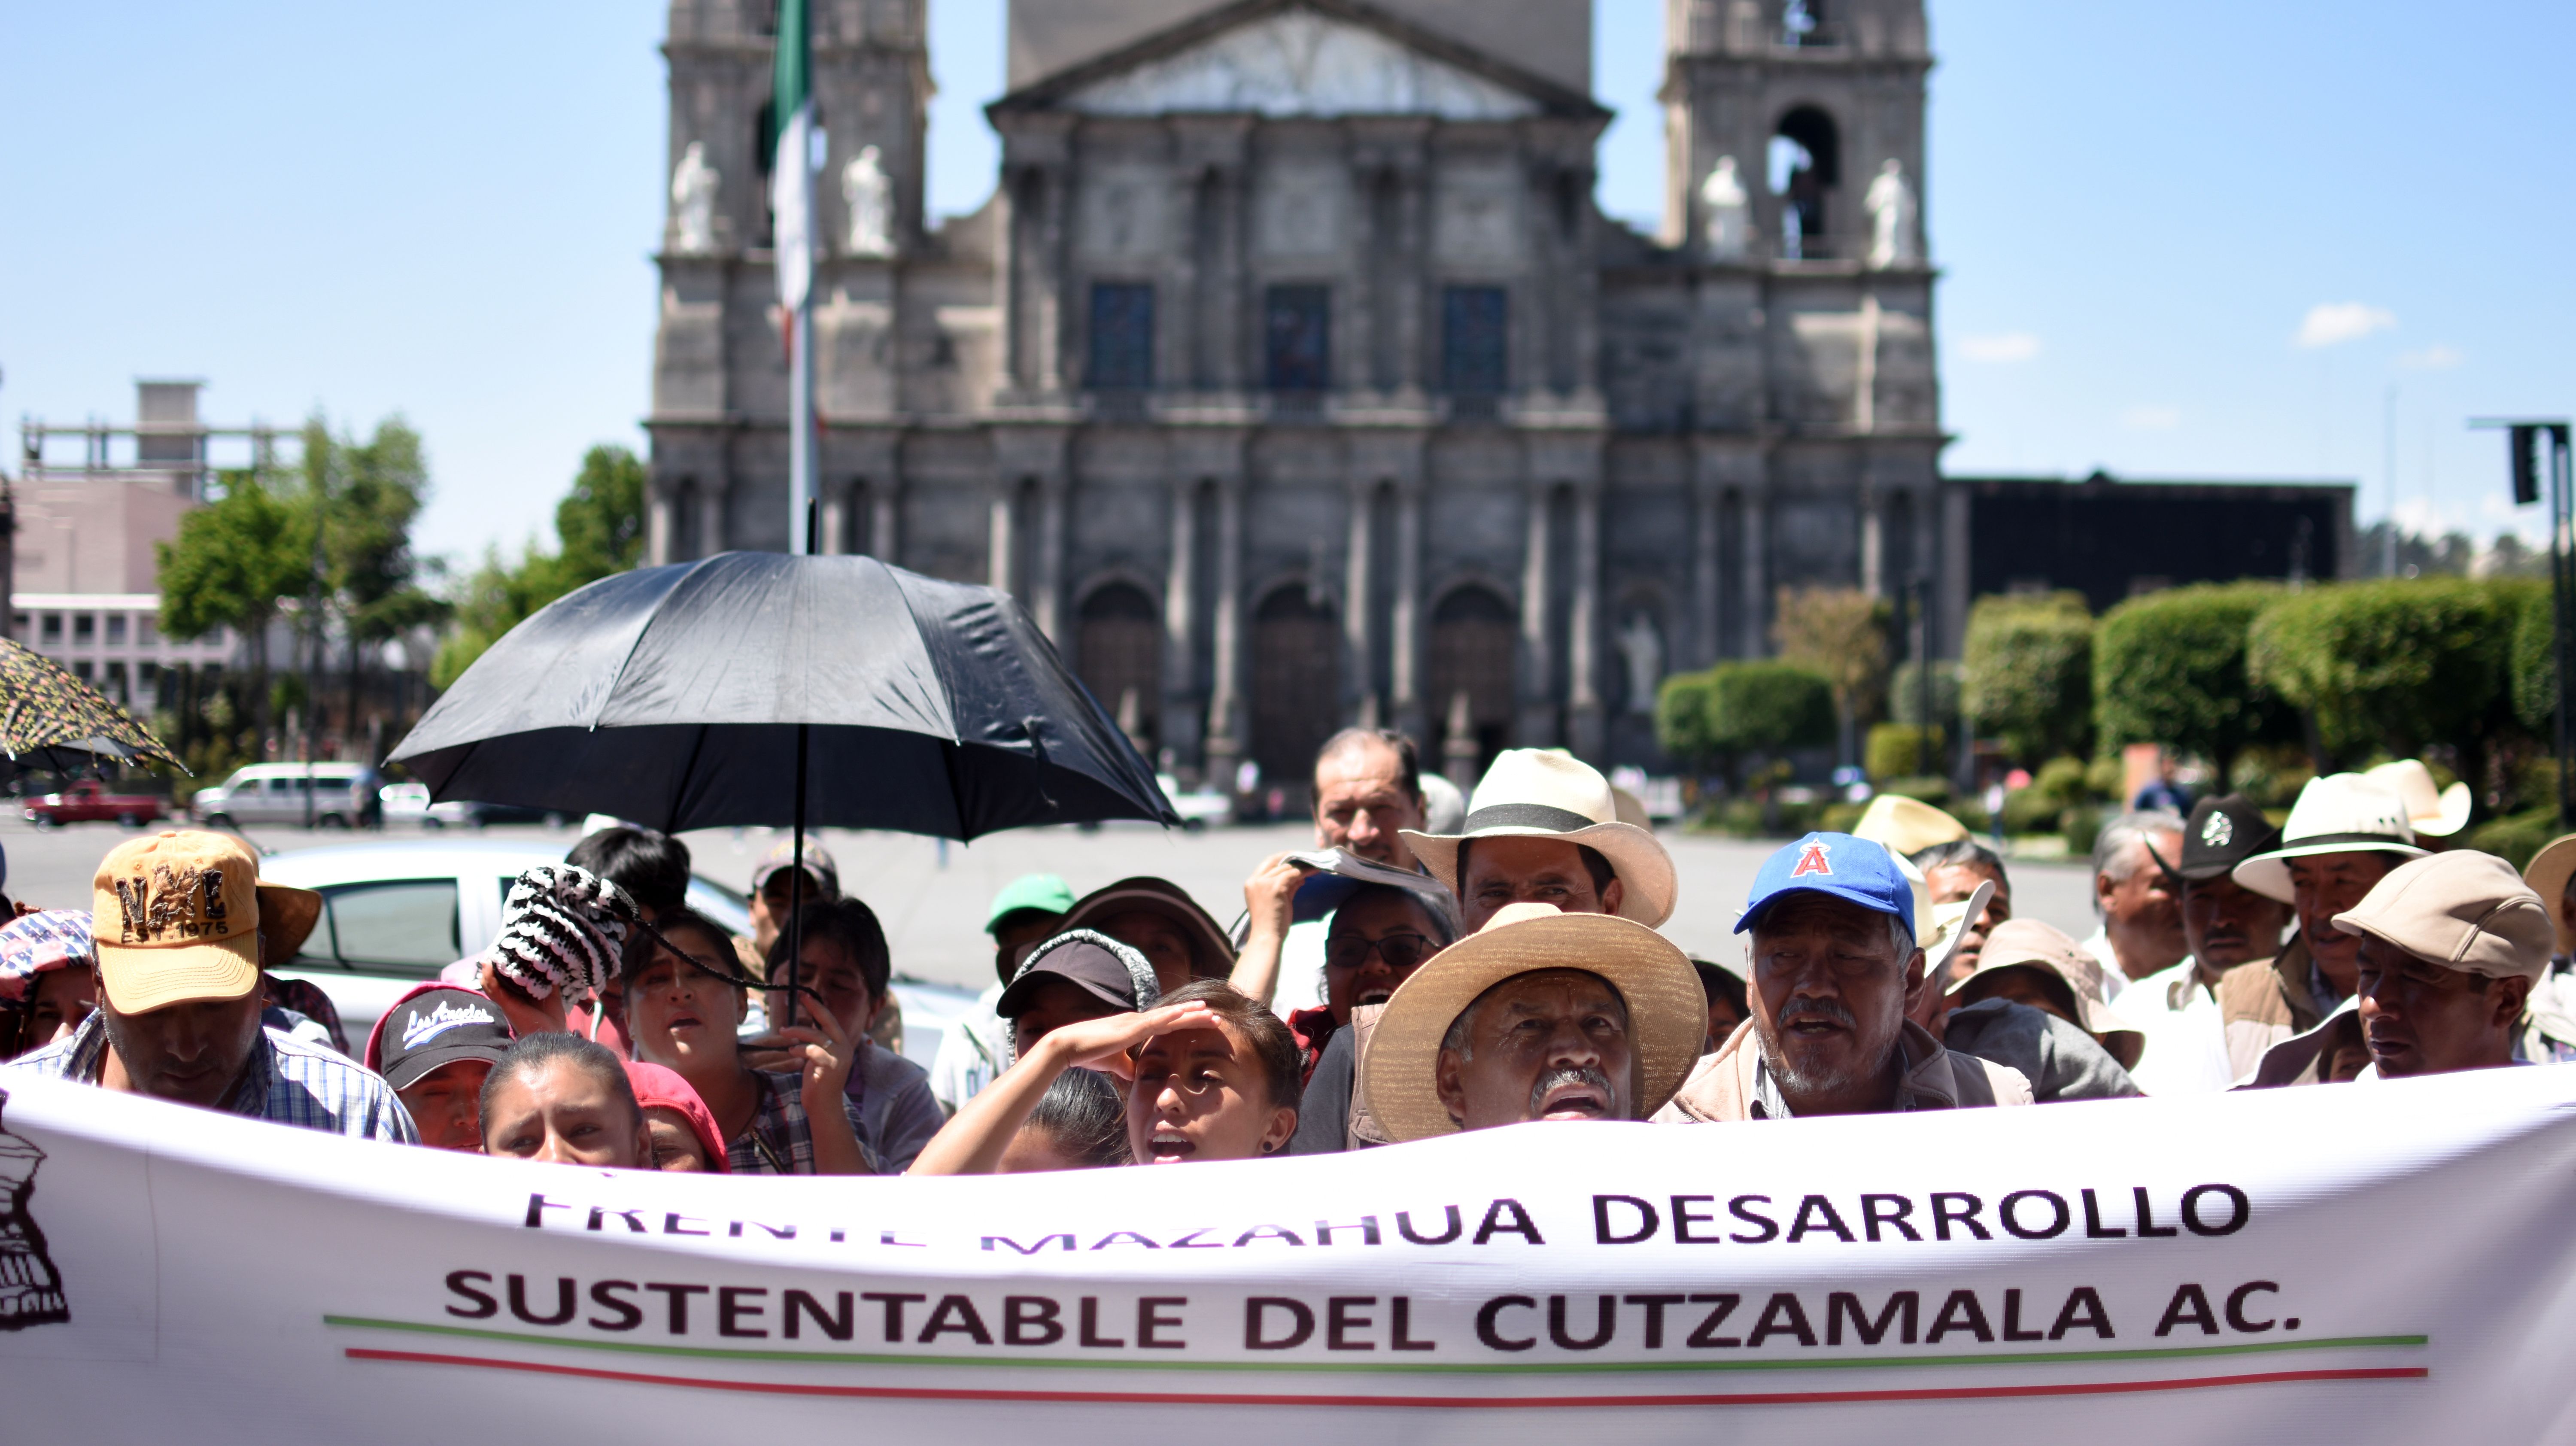 Members of the Mazahua Frente chant during a protest outside the governor’s building in Toluca. The group demanded to meet with the governor to discuss their community needs. Image by Meg Vatterott. Mexico, 2018.